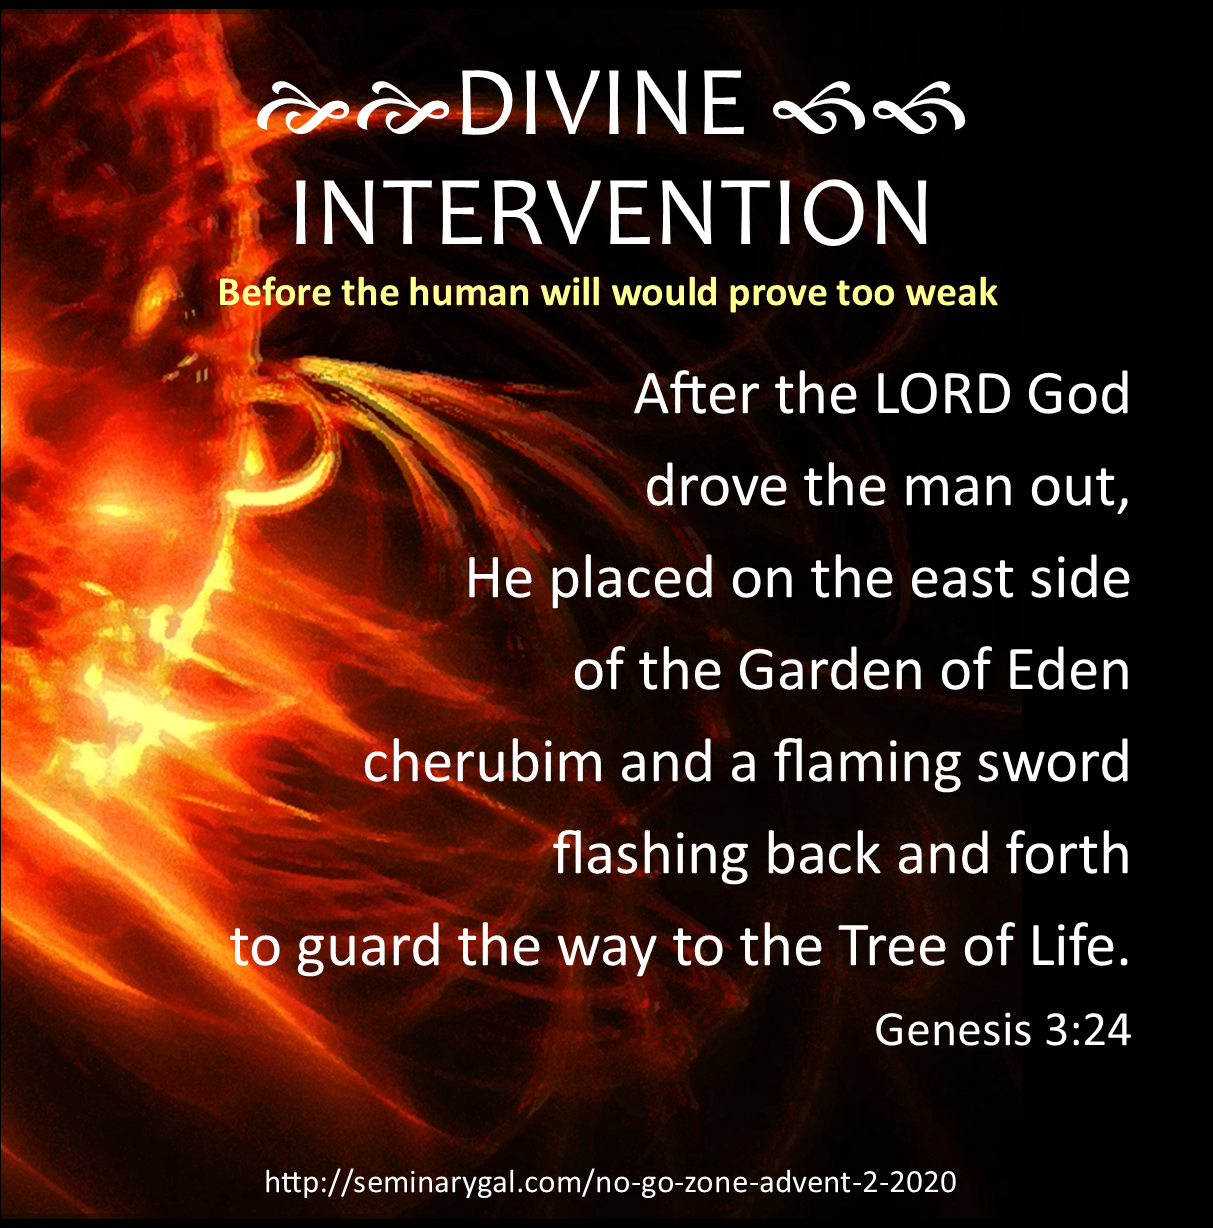 cherubim and a flaming sword flashing back and forth